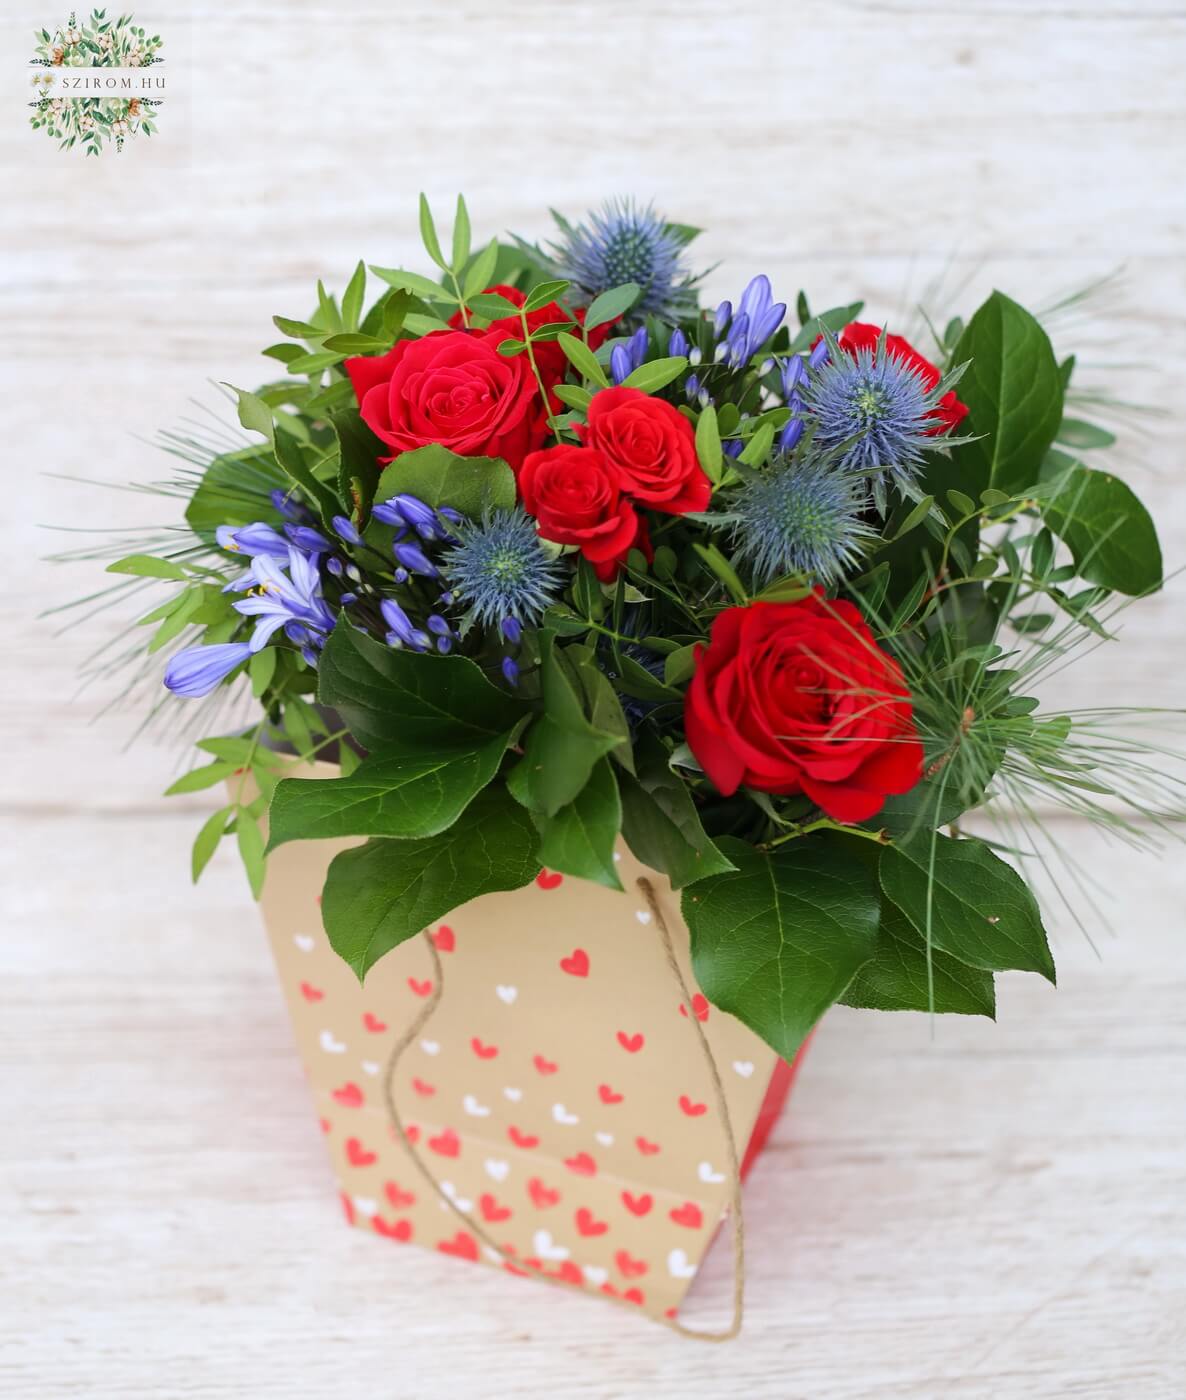 flower delivery Budapest - Small red rose bouquet with agapanthus, eryngium (9 stems) in aquapack paperbag